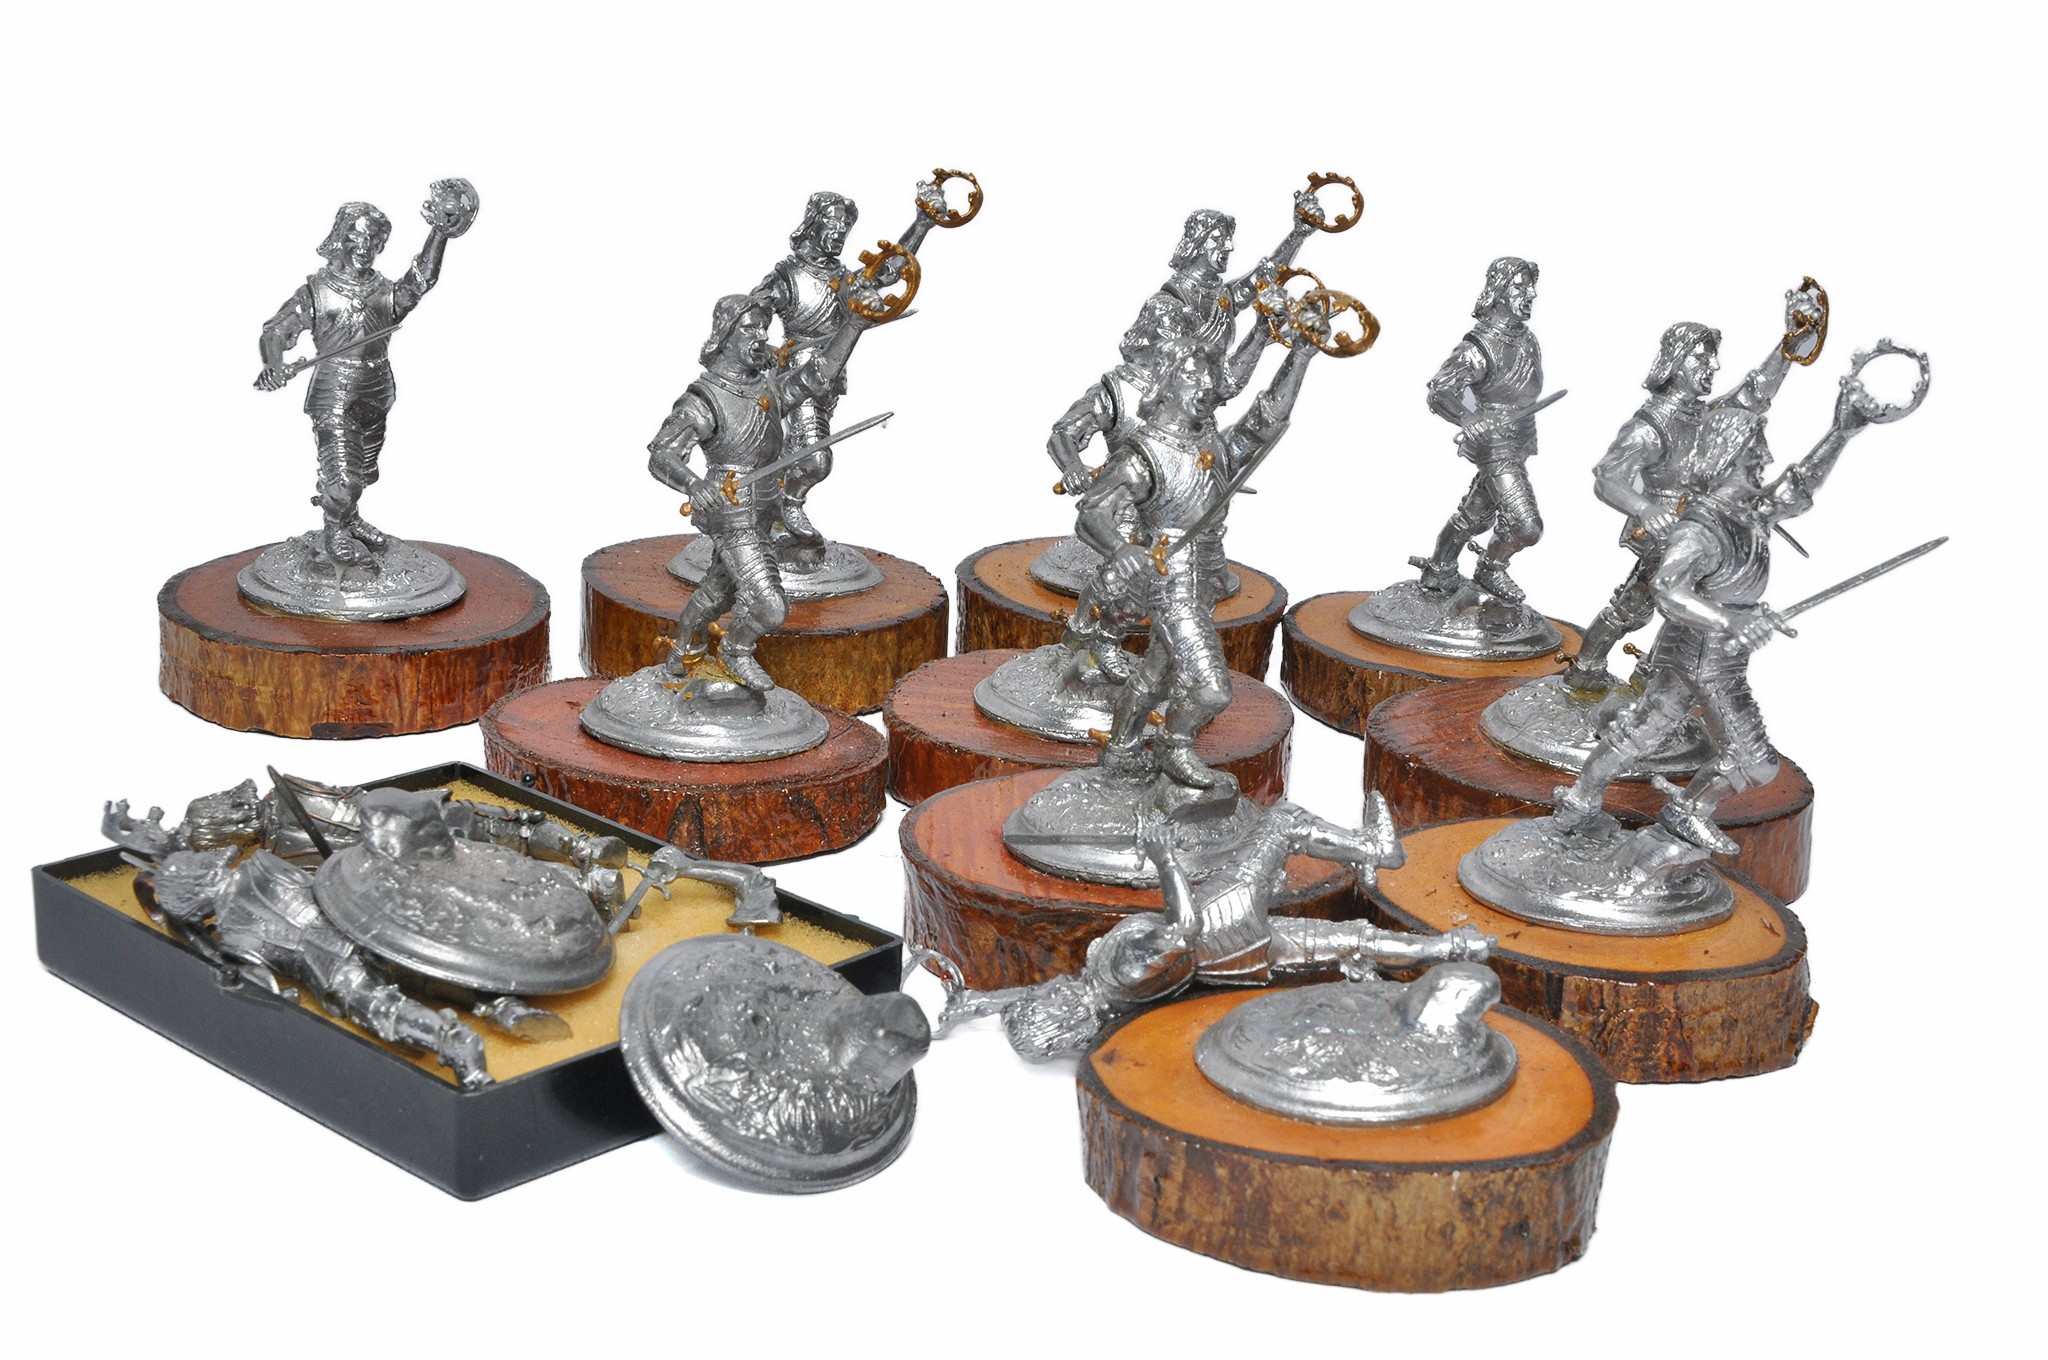 A collection of larger scale, approx 3 inch, white metal figures depicting Richard III (identical to